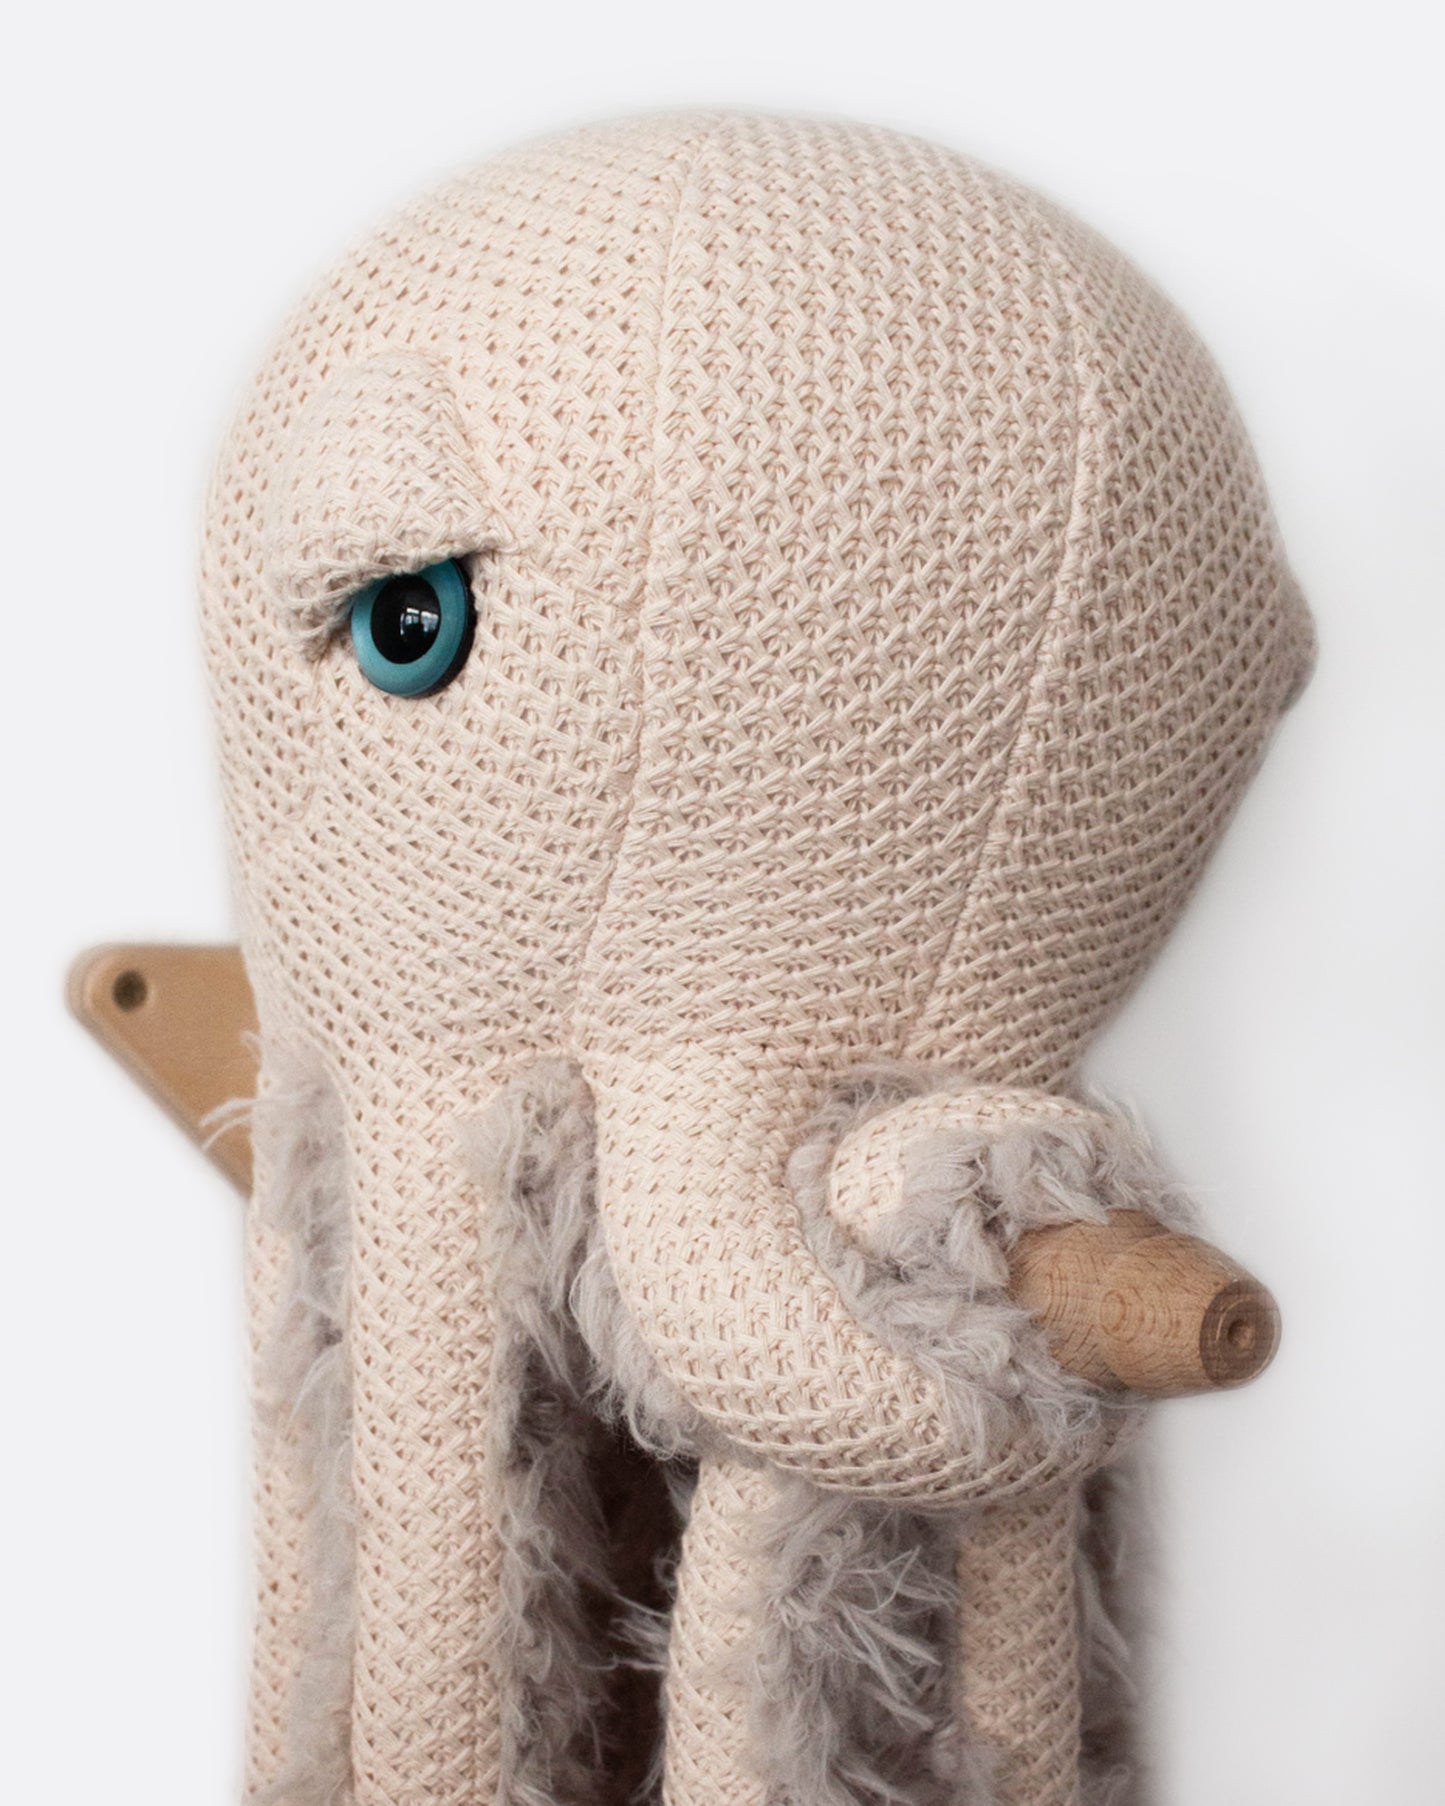 This pale pink octopus is made with strong stitching and premium fabrics; it was born to last and stay by your side.